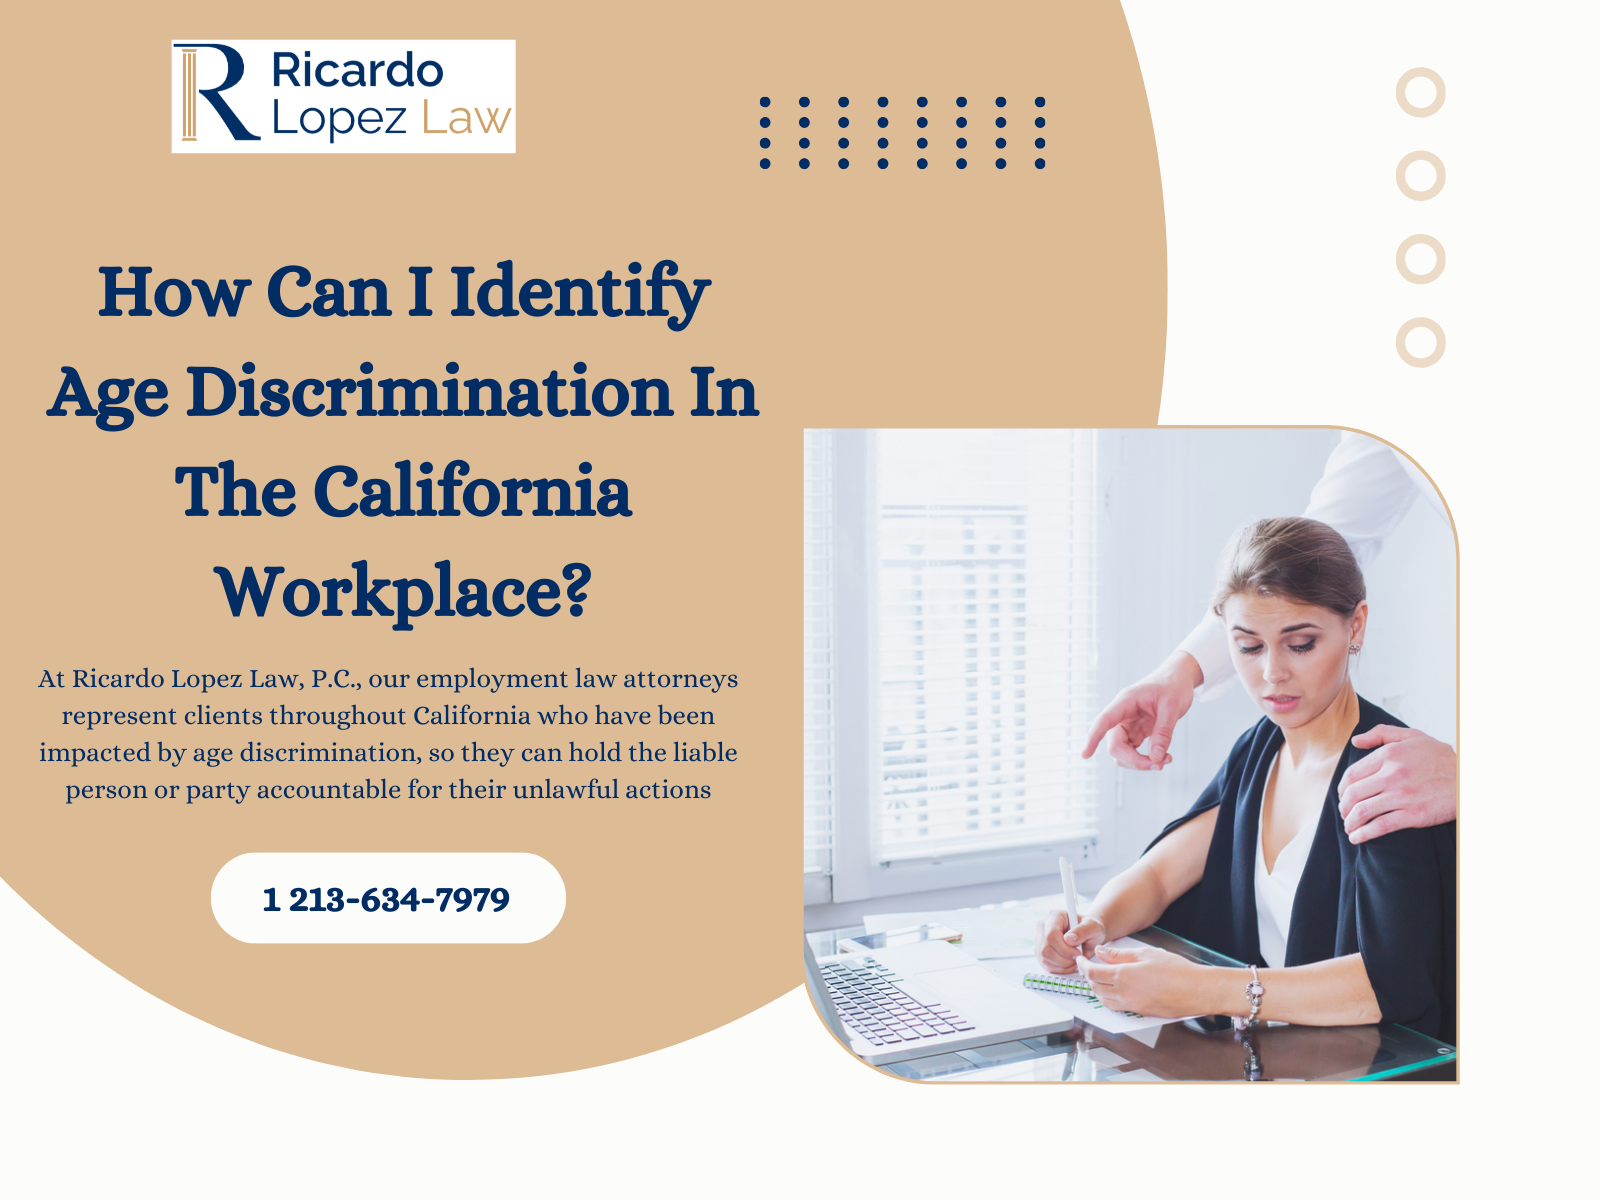 How Can I Identify Workplace Age Discrimination in the California?